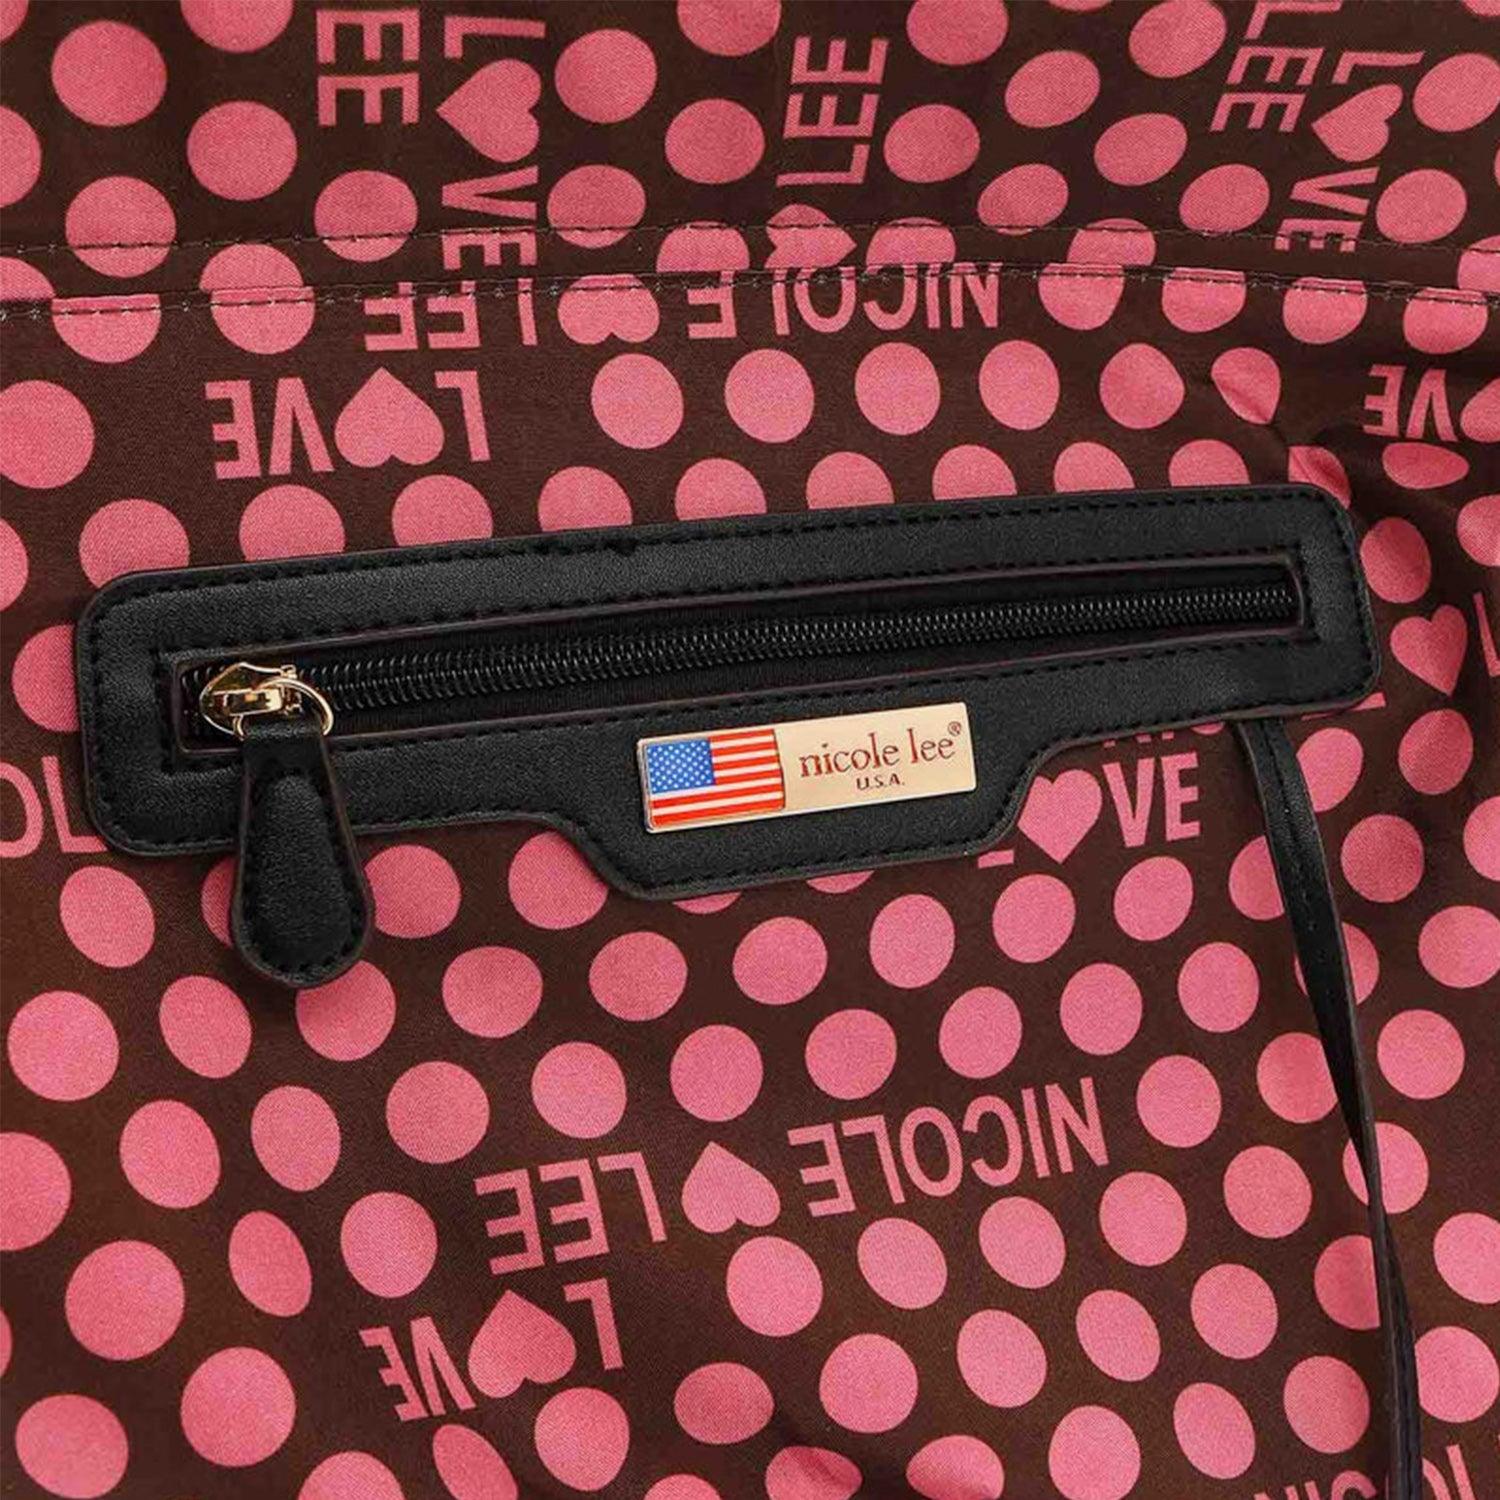 a close up of a purse with a tag on it